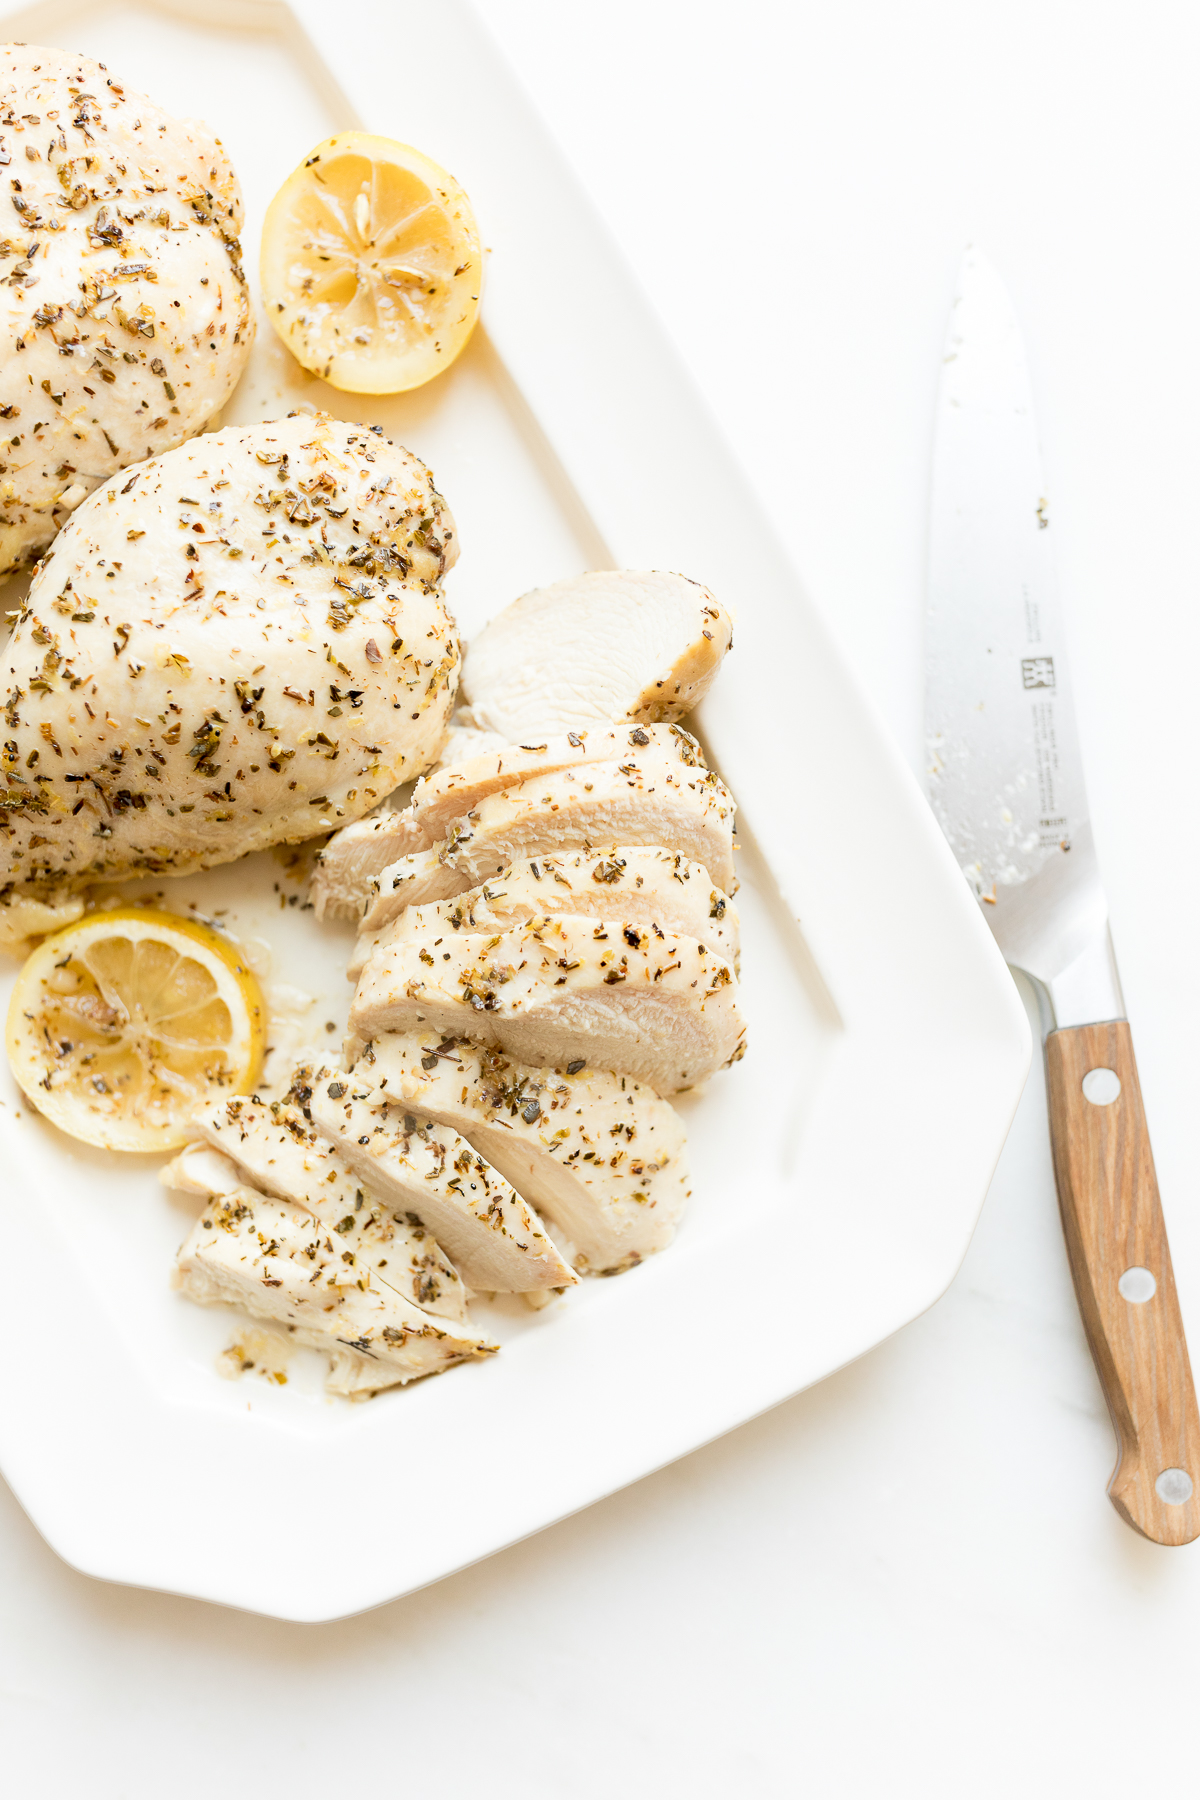 Sliced, seasoned lemon chicken breast on a white plate with lemon slices and a knife beside it on a light background.